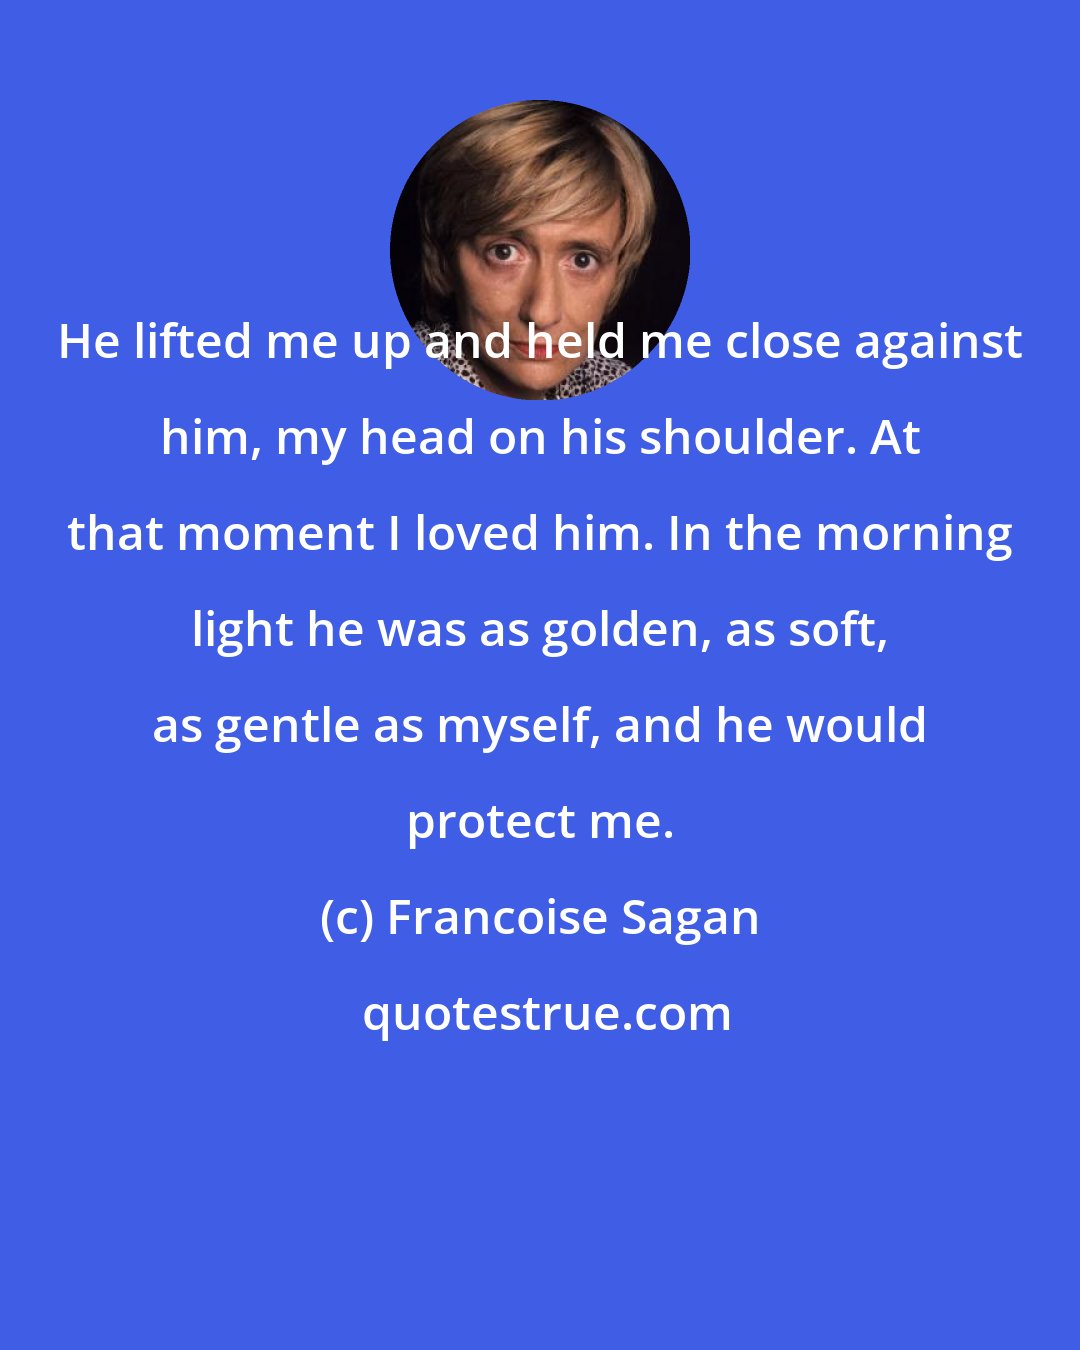 Francoise Sagan: He lifted me up and held me close against him, my head on his shoulder. At that moment I loved him. In the morning light he was as golden, as soft, as gentle as myself, and he would protect me.